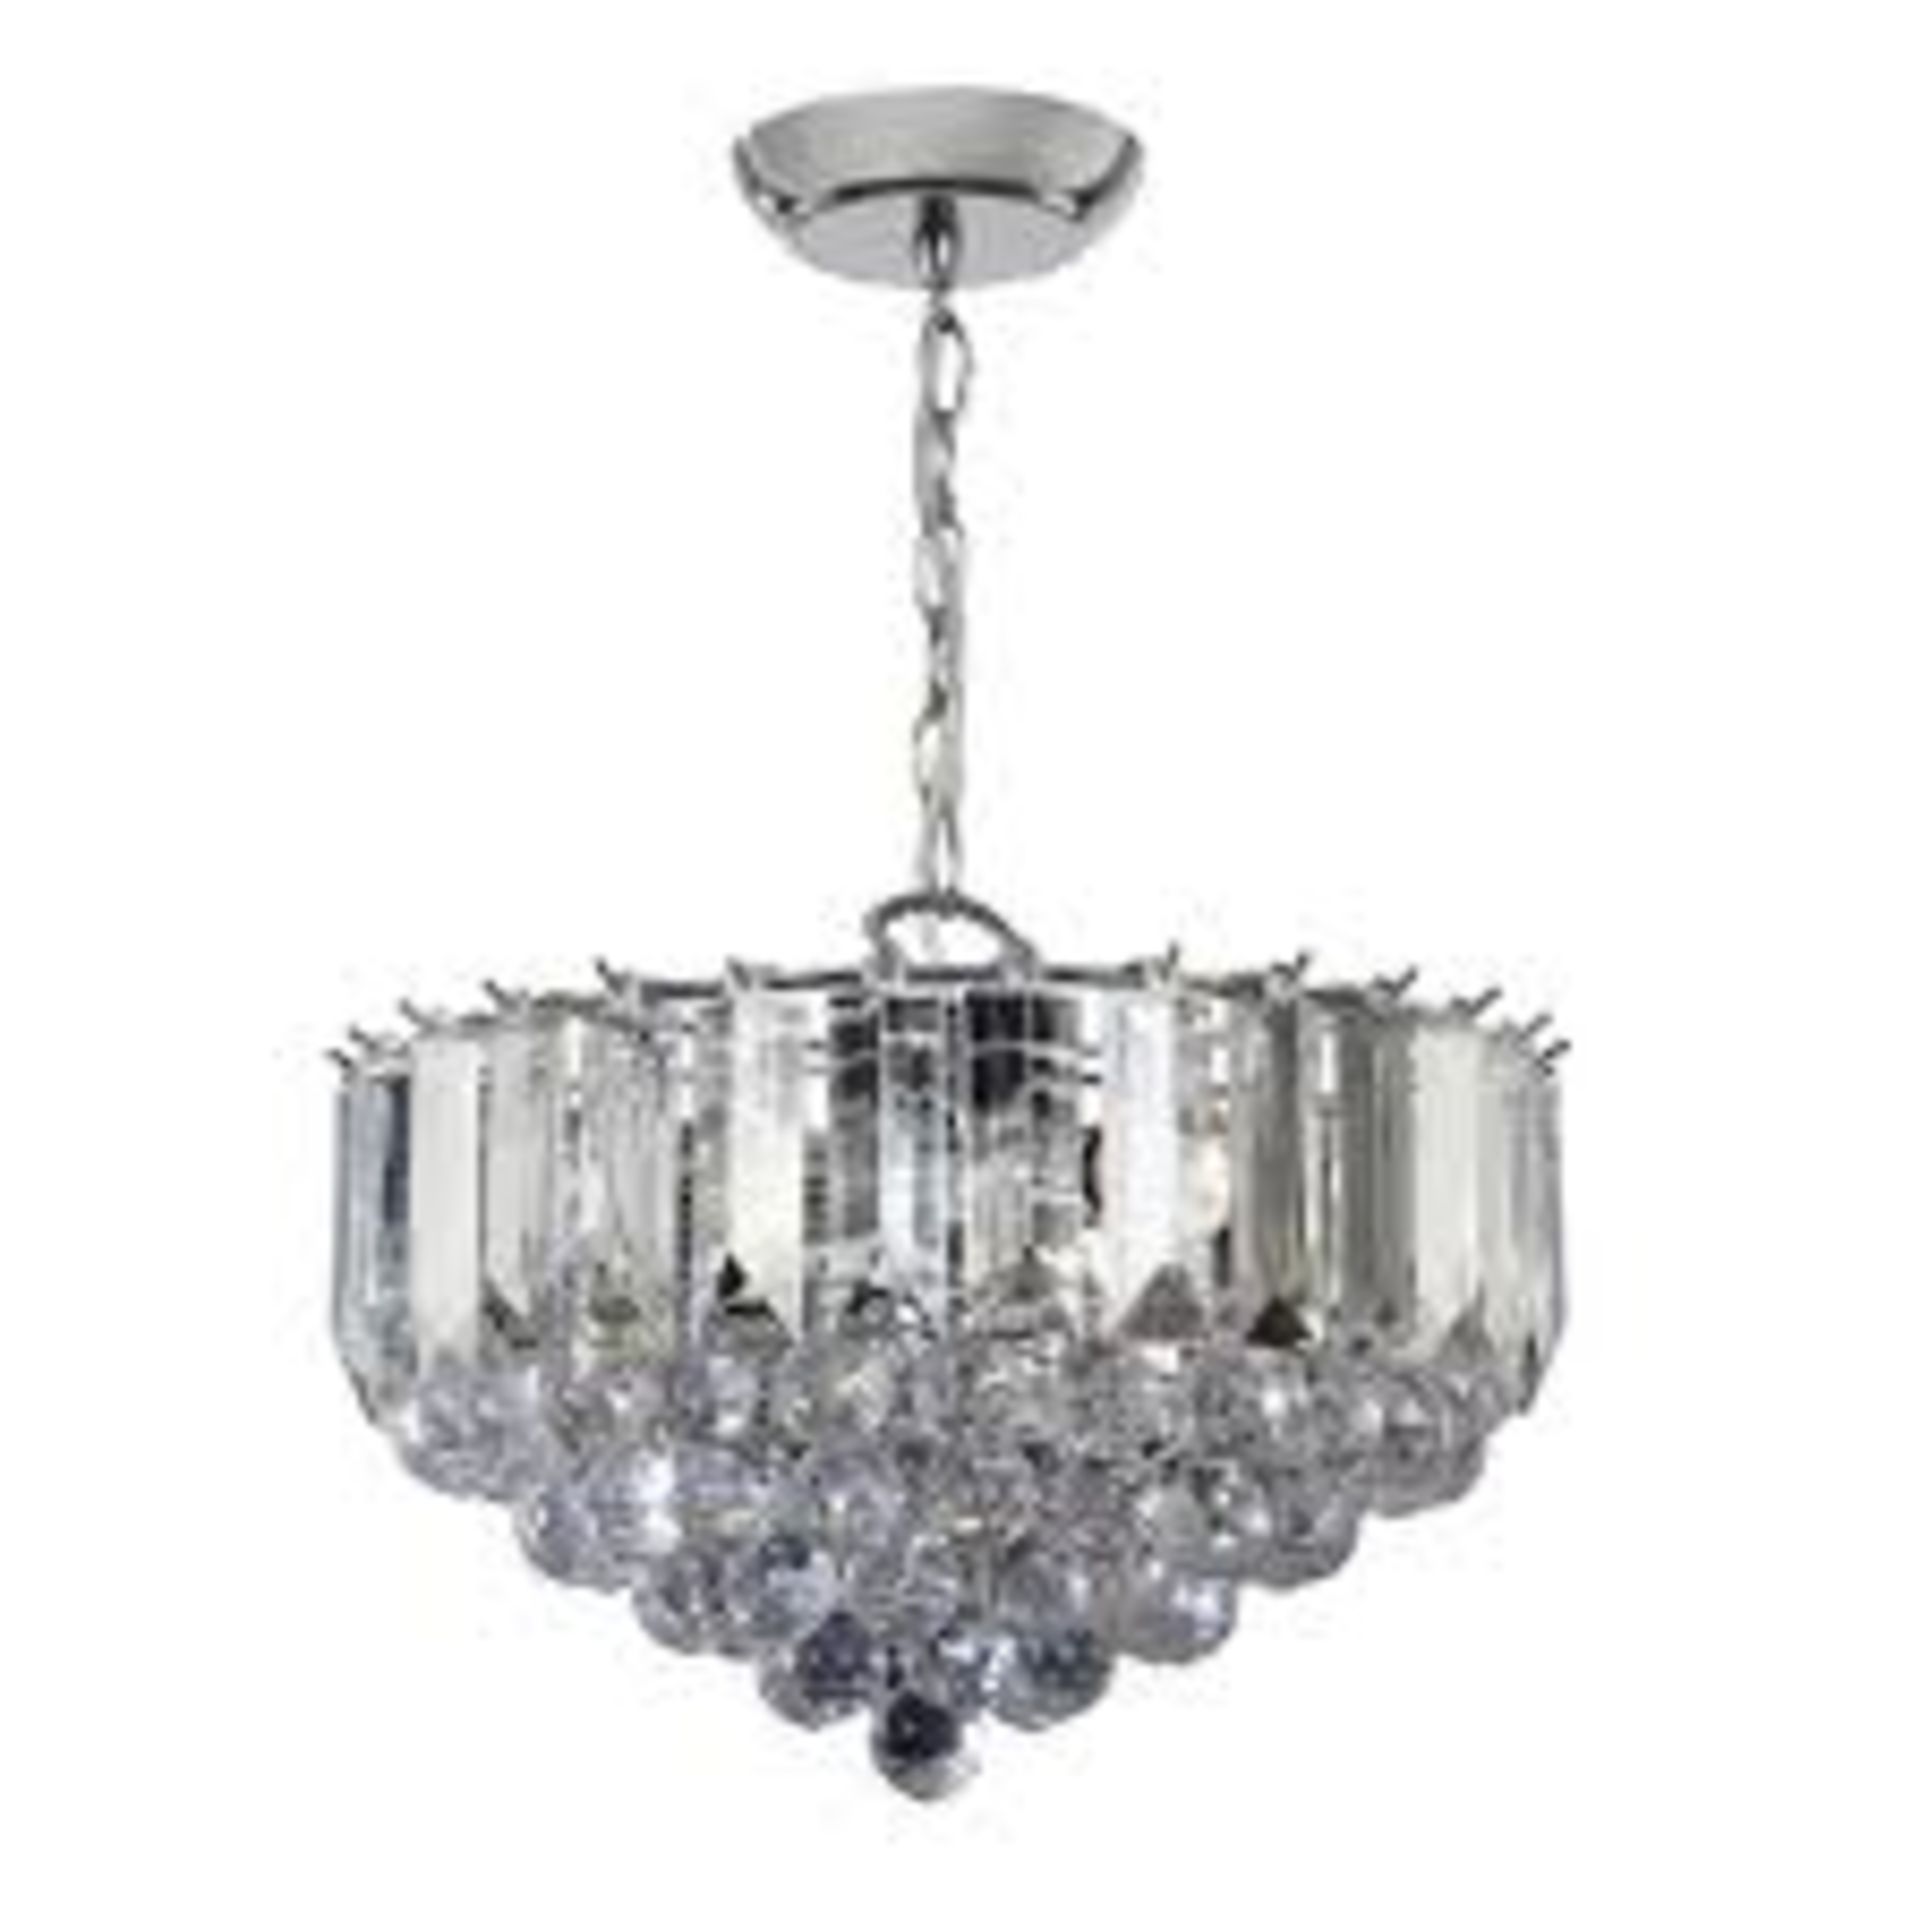 Boxed Stainless Steel And Acrylic Designer Ceiling Light Fitting RRP £80 (15097) (Public Viewing and